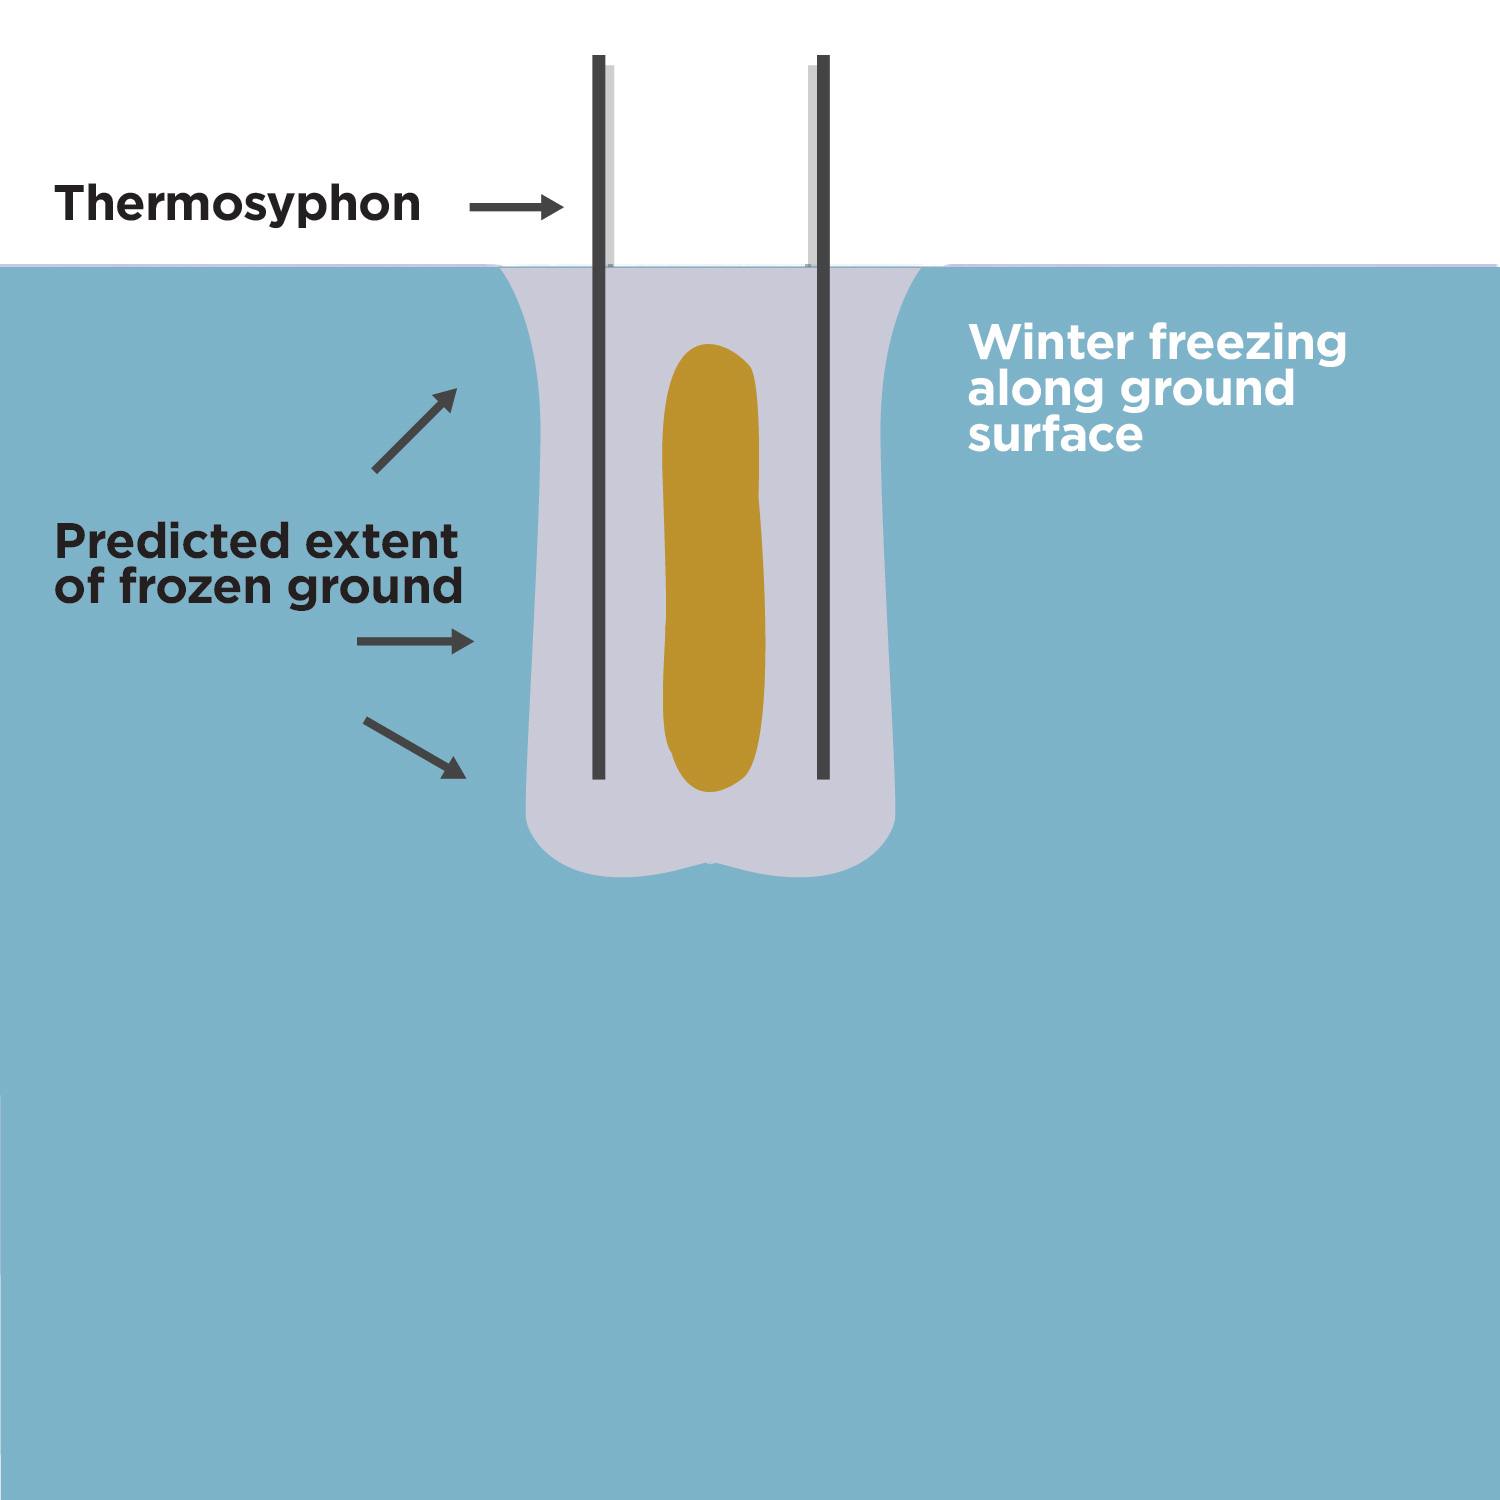 This figure shows a visual representation of an arsenic chamber after it has been frozen, with two 2 parallel vertical lines representing the thermosyphons located on the outside of the chamber. The area representing the ground is labeled 'winter freezing along ground surface.' A block representing the predicted extent of the frozen ground surrounds the chamber and encompasses the thermosyphons.